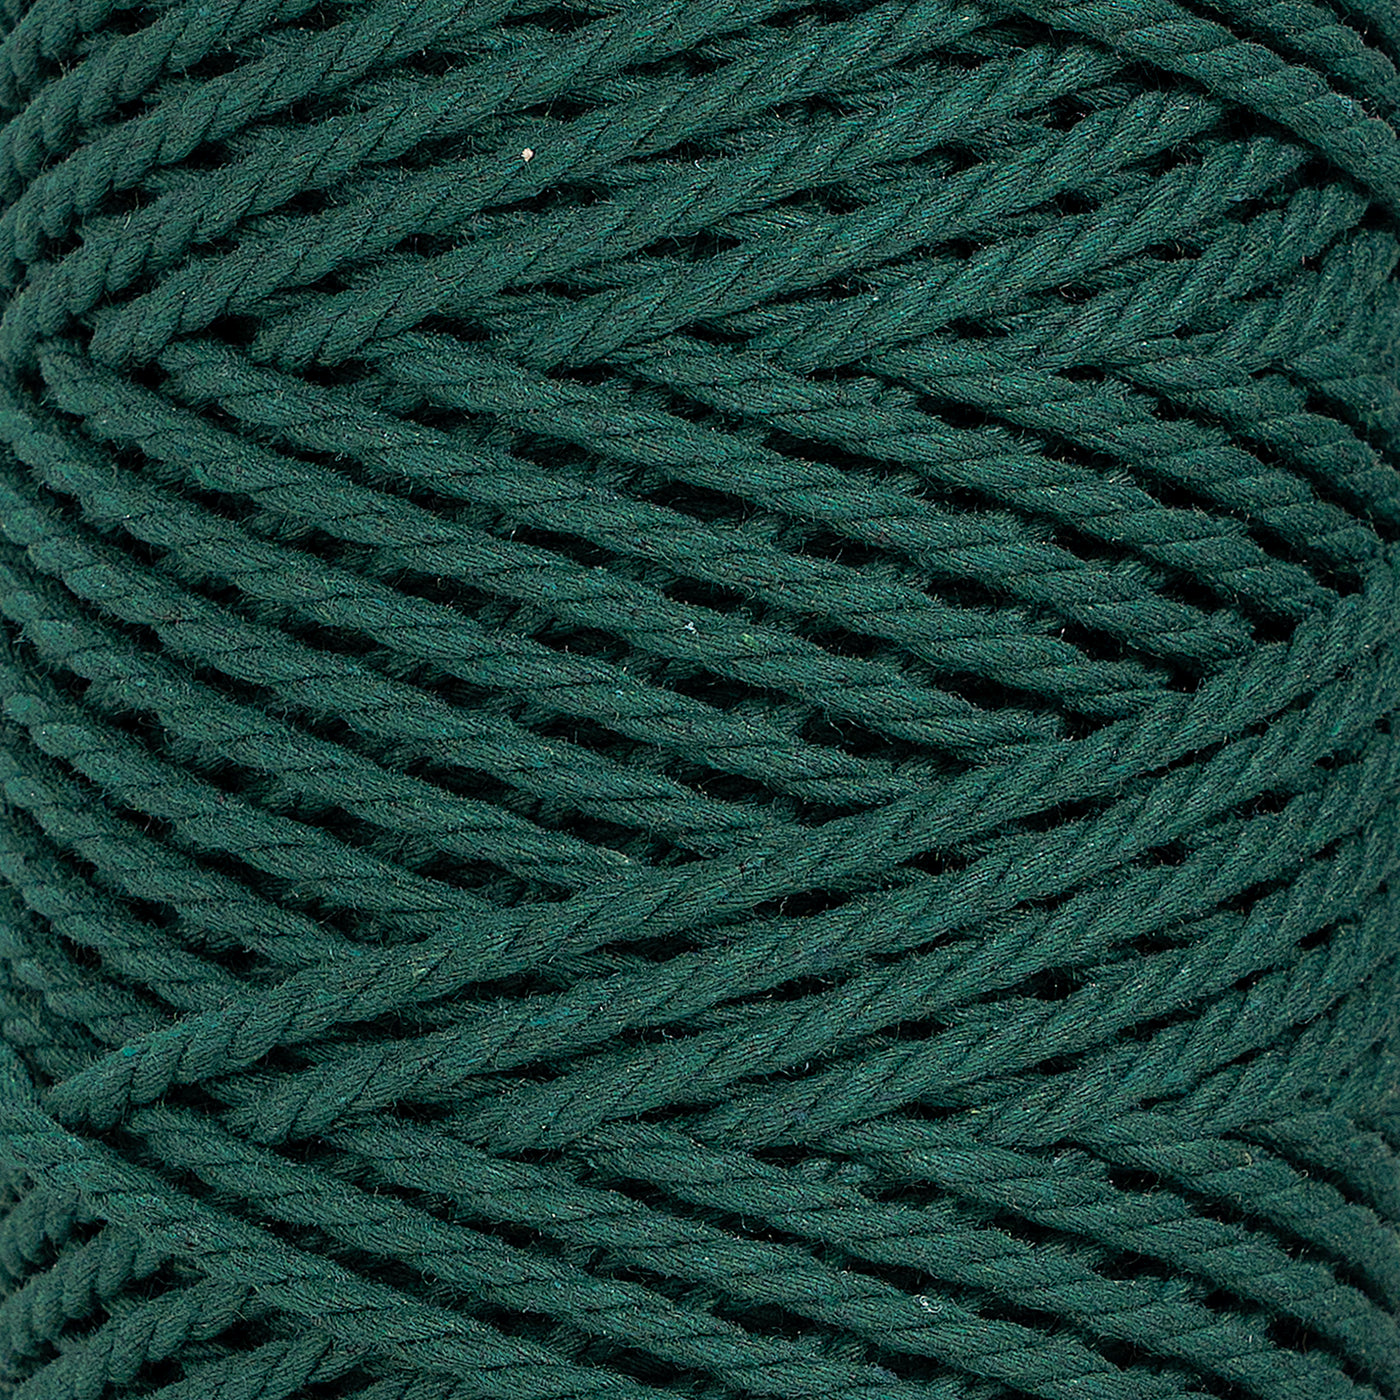 COTTON ROPE ZERO WASTE 3 MM - 3 PLY - FOREST GREEN COLOR